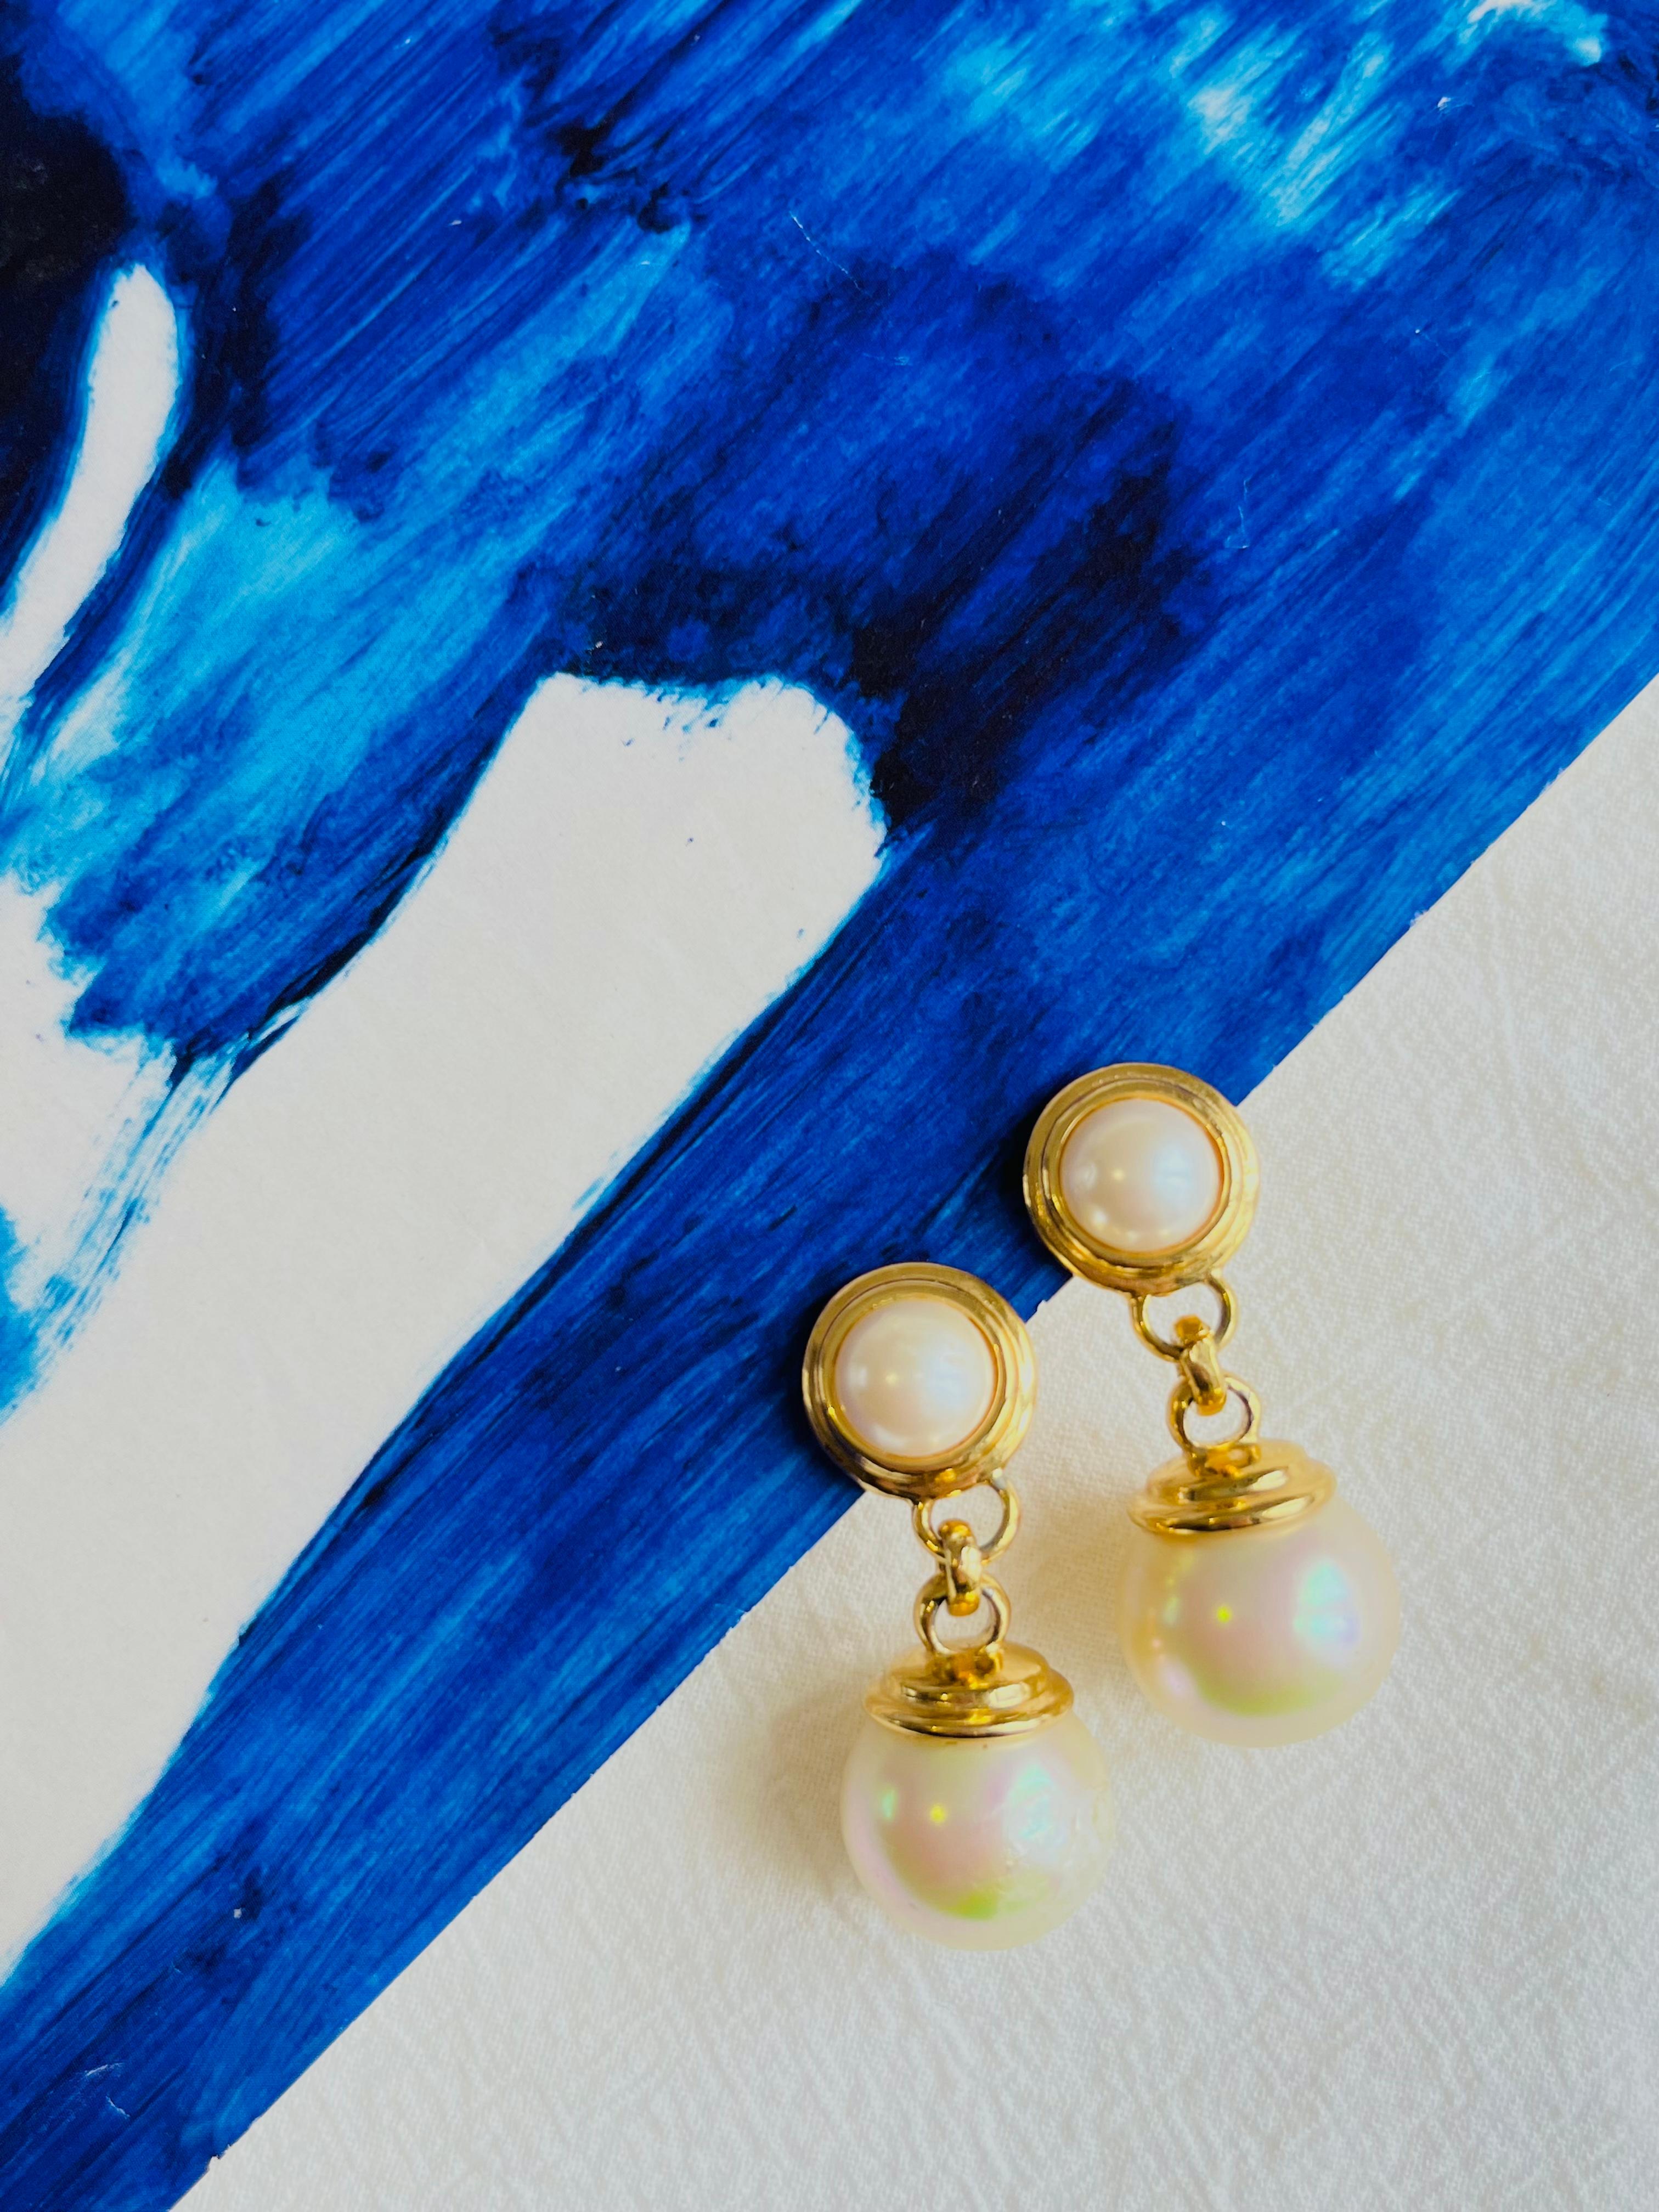 Good condition. One earring has been peeled off at faux pearl. Still very good to look when wearing them. 100% Genuine.

A very beautiful pair of earrings by Chr. DIOR, signed at the back.

Size: 4.5*1.8 cm.

Weight: 15.0 g/each.

_ _ _

Great for